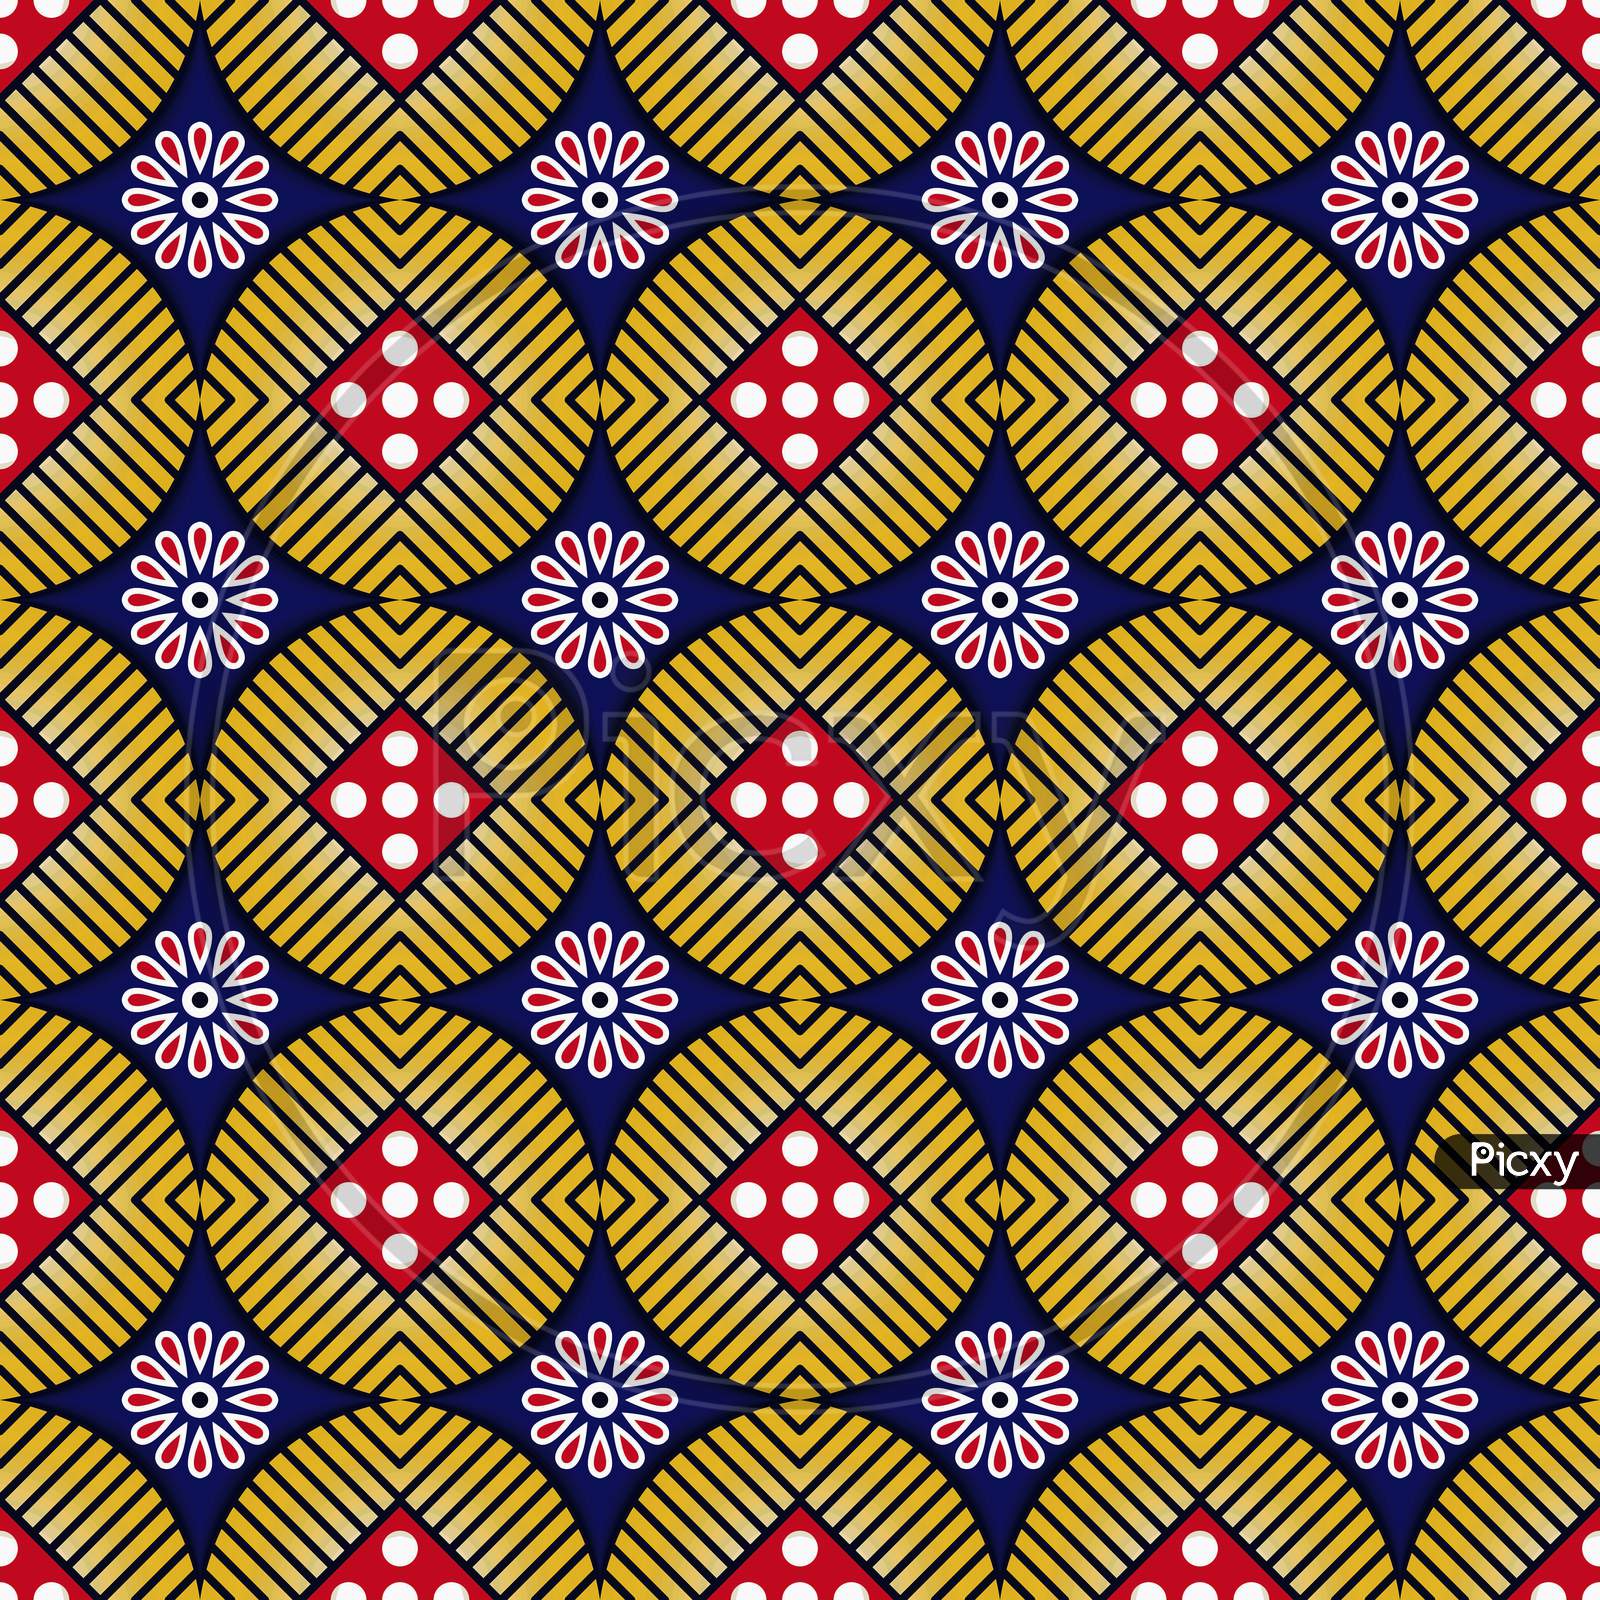 Colorful Tiles Abstract Ornament Seamless Pattern Design